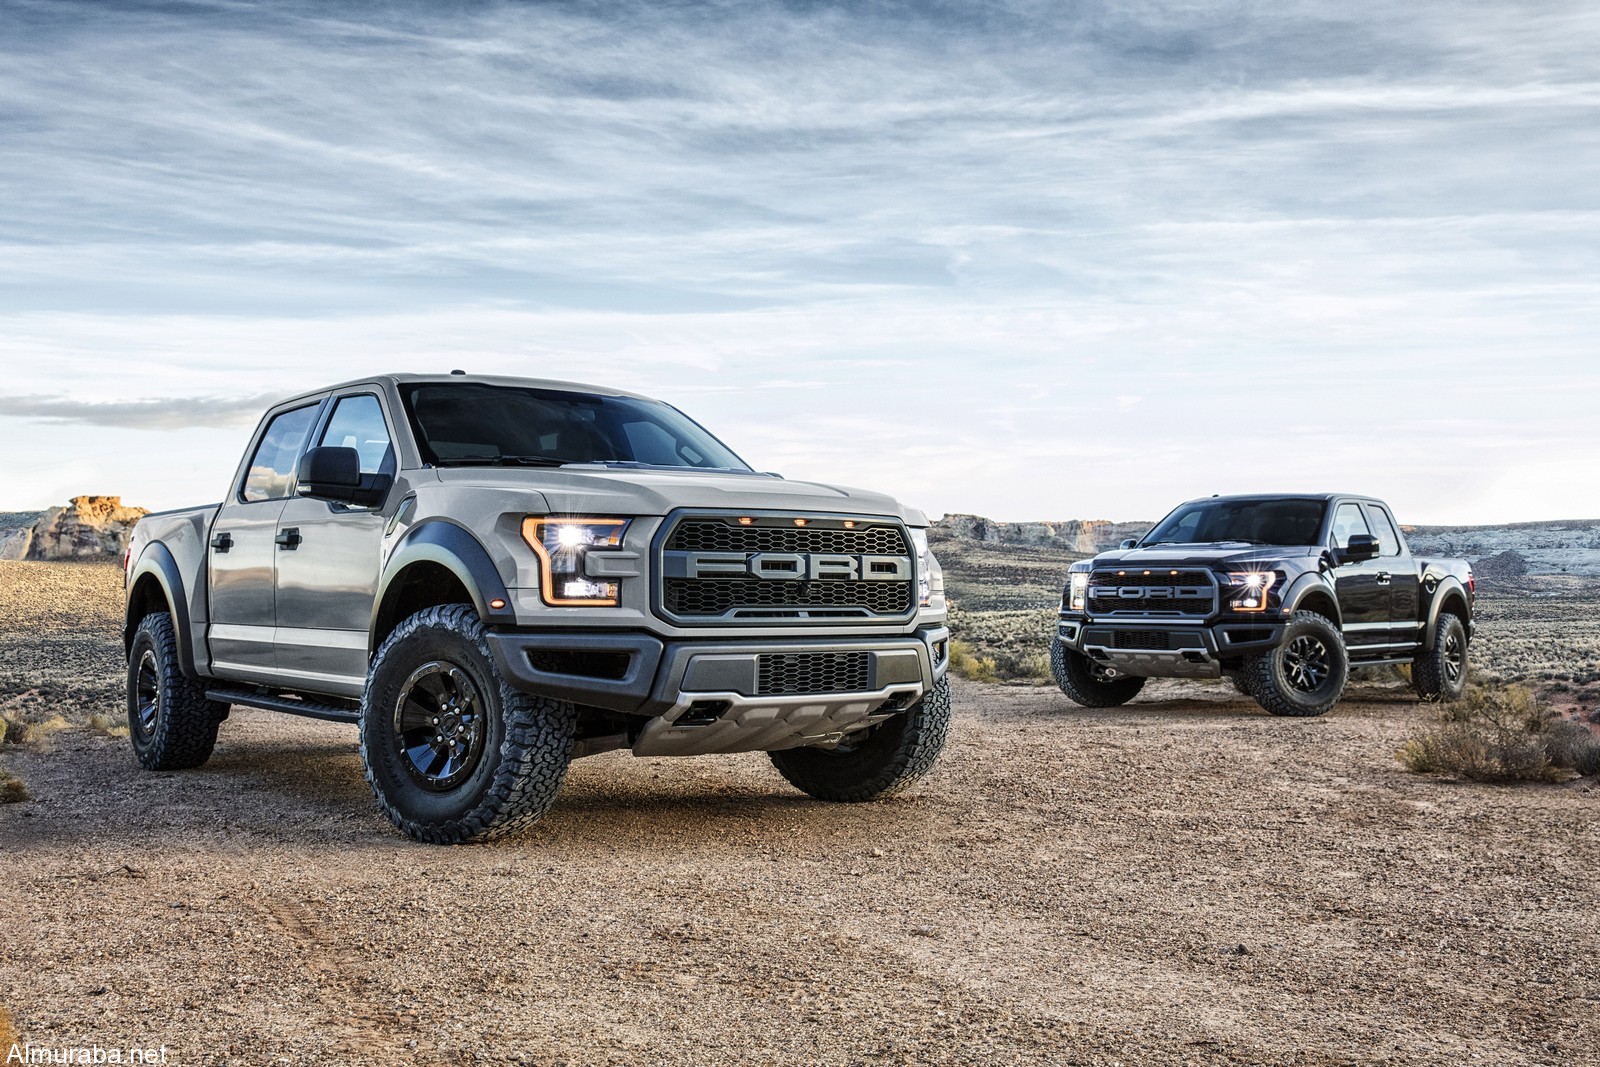 The all-new 2017 Ford F-150 Raptor SuperCrew and SuperCab redefine high-performance off-roading in the toughest, smartest, most capable F-150 Raptor ever. F-150 Raptor goes on sale this fall.